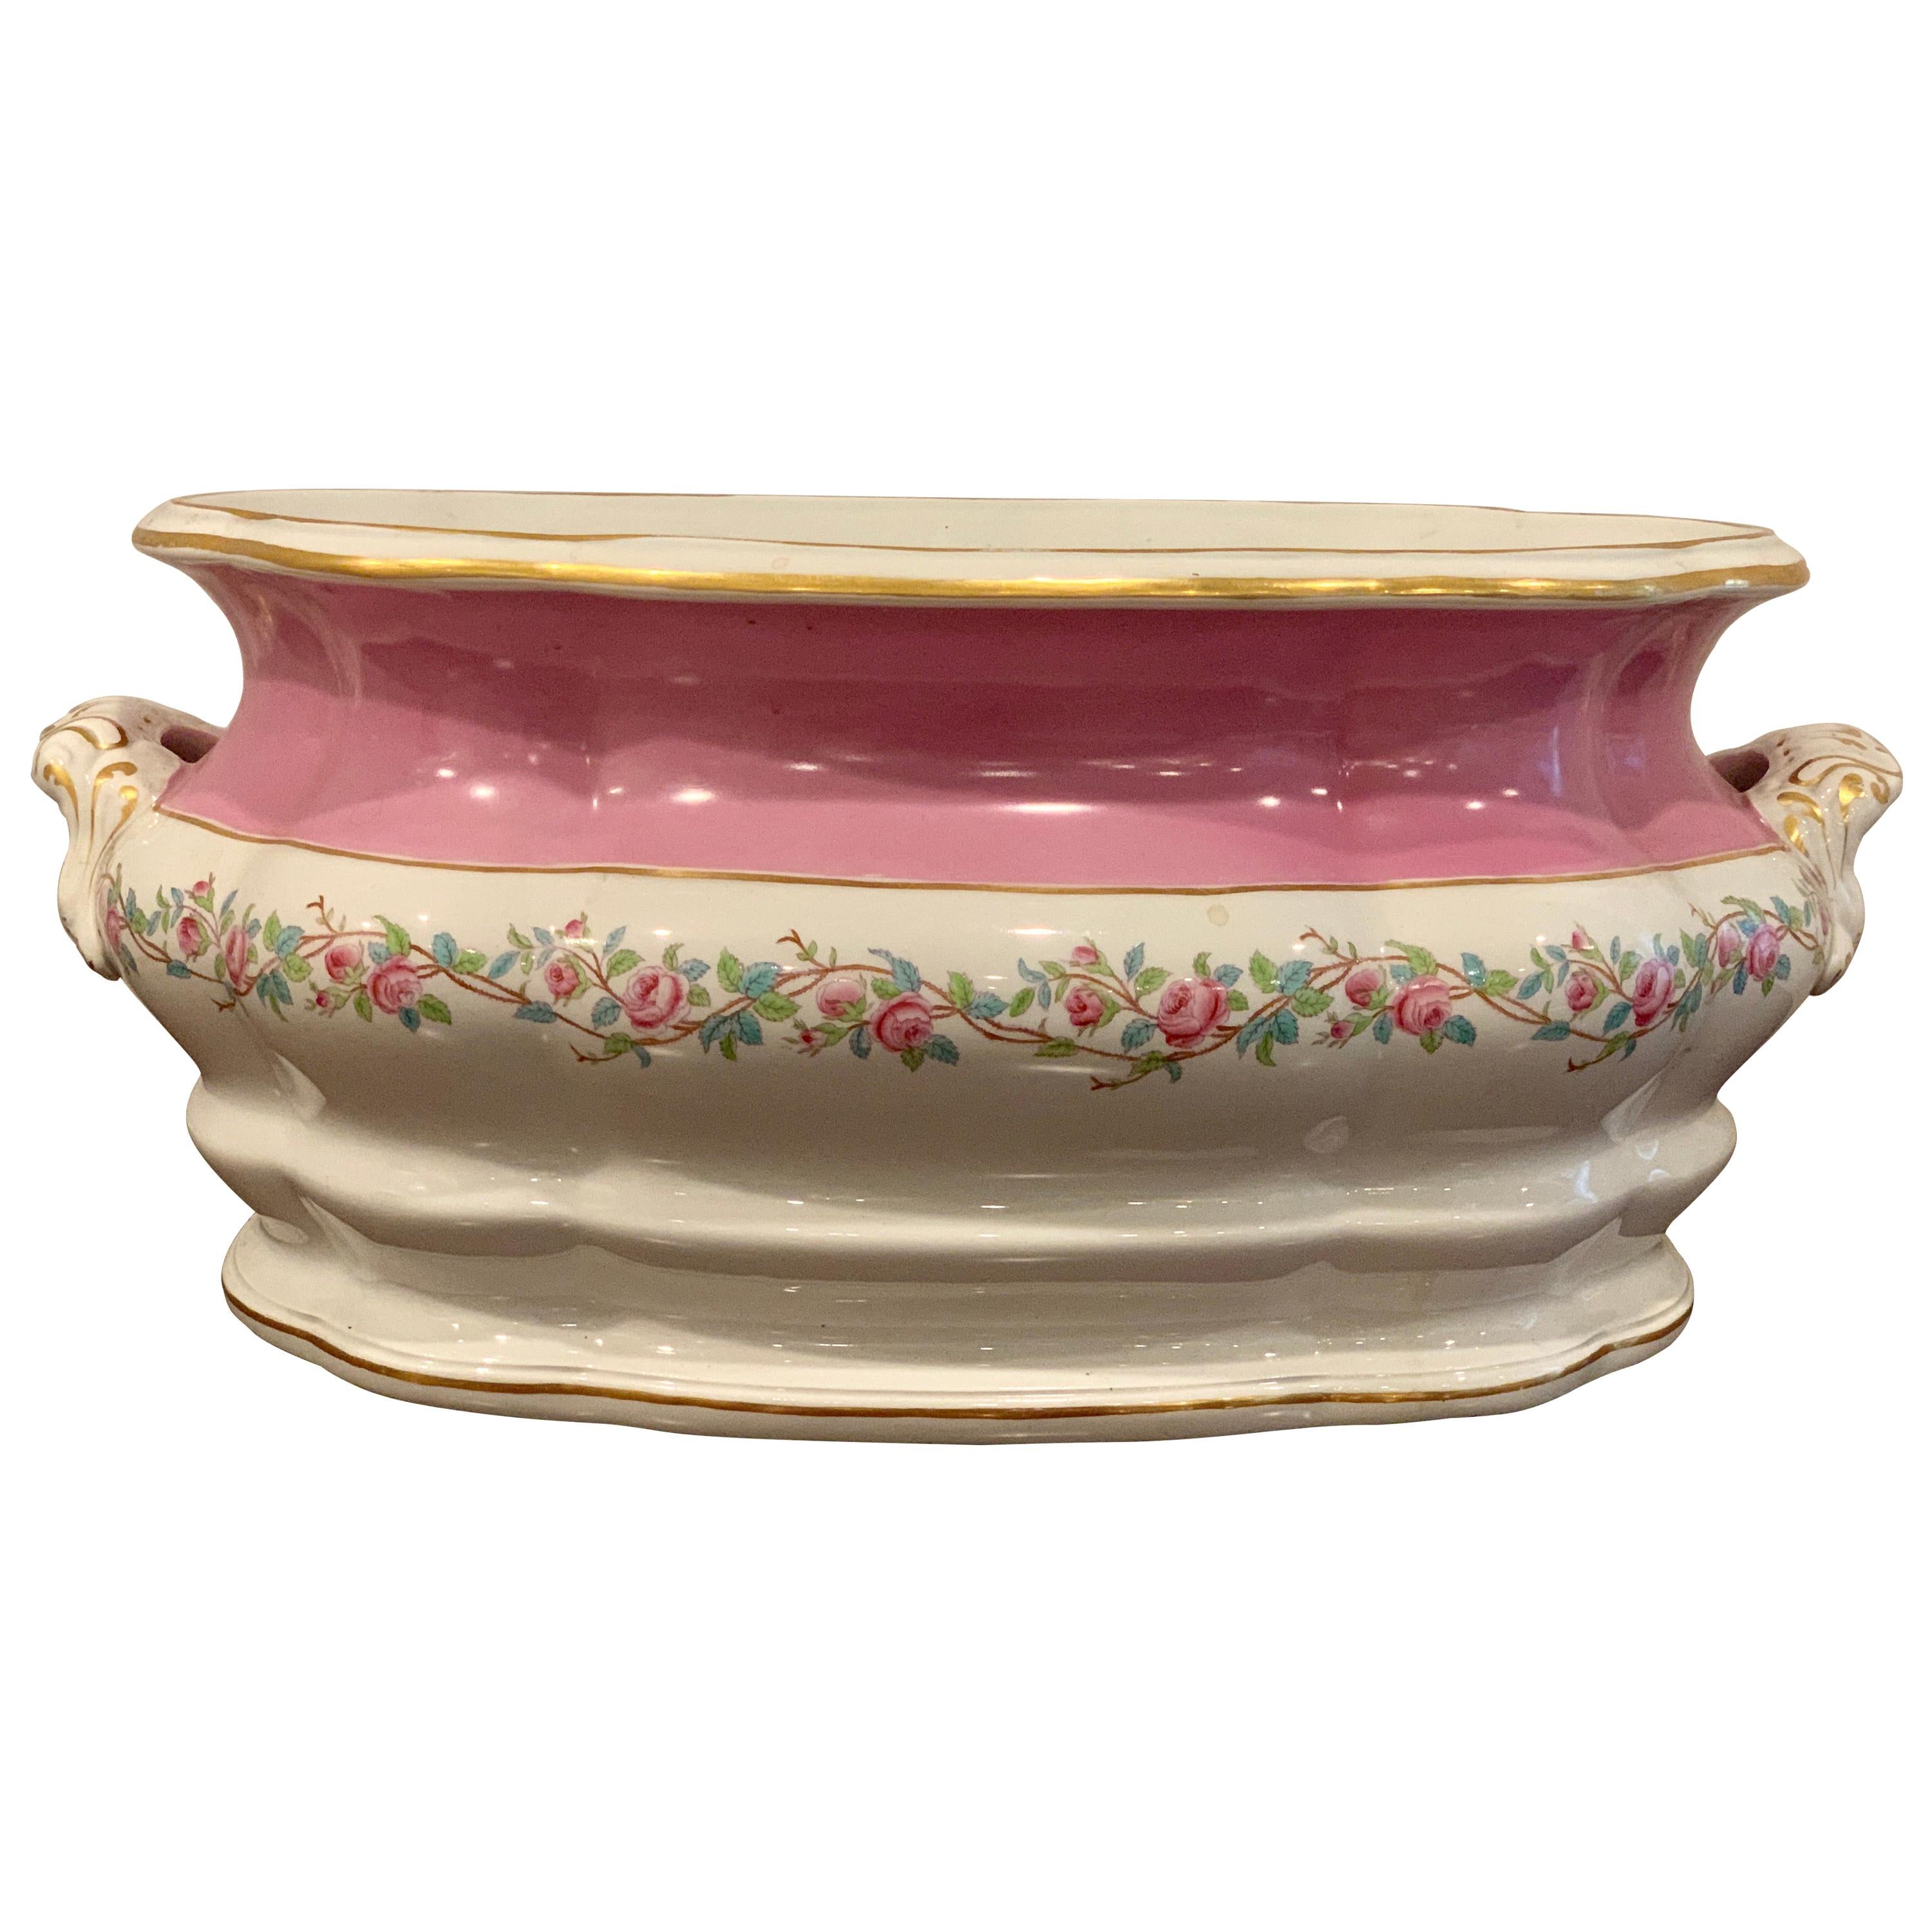 19th Century Pink Floral Porcelain Foot Bath, Attributed to Mintons For Sale